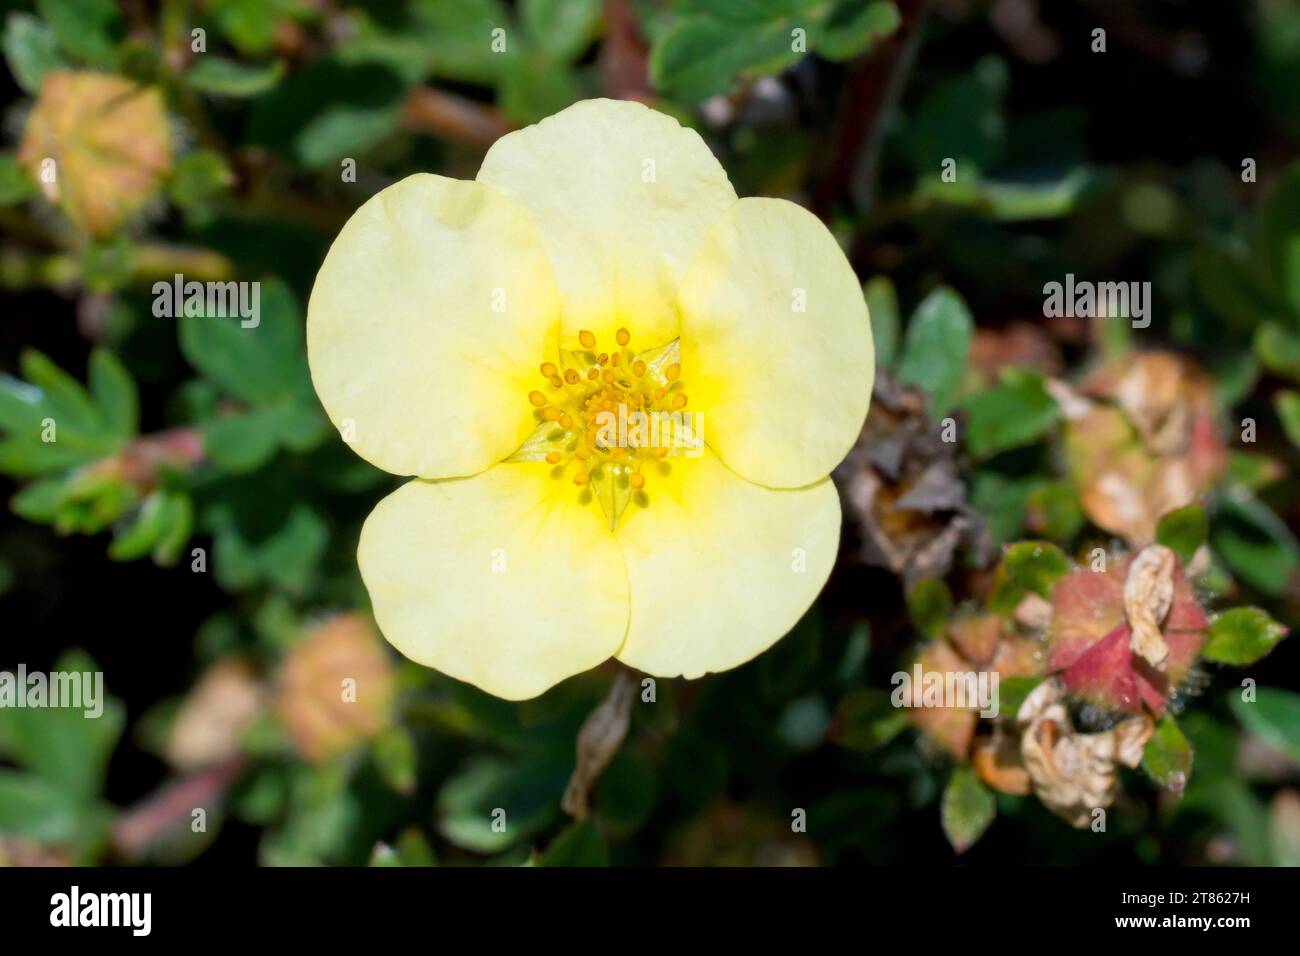 Shrubby Cinquefoil (potentilla fruticosa), close up showing the pale yellow flowers of this particular cultivar of the commonly plant shrub. Stock Photo